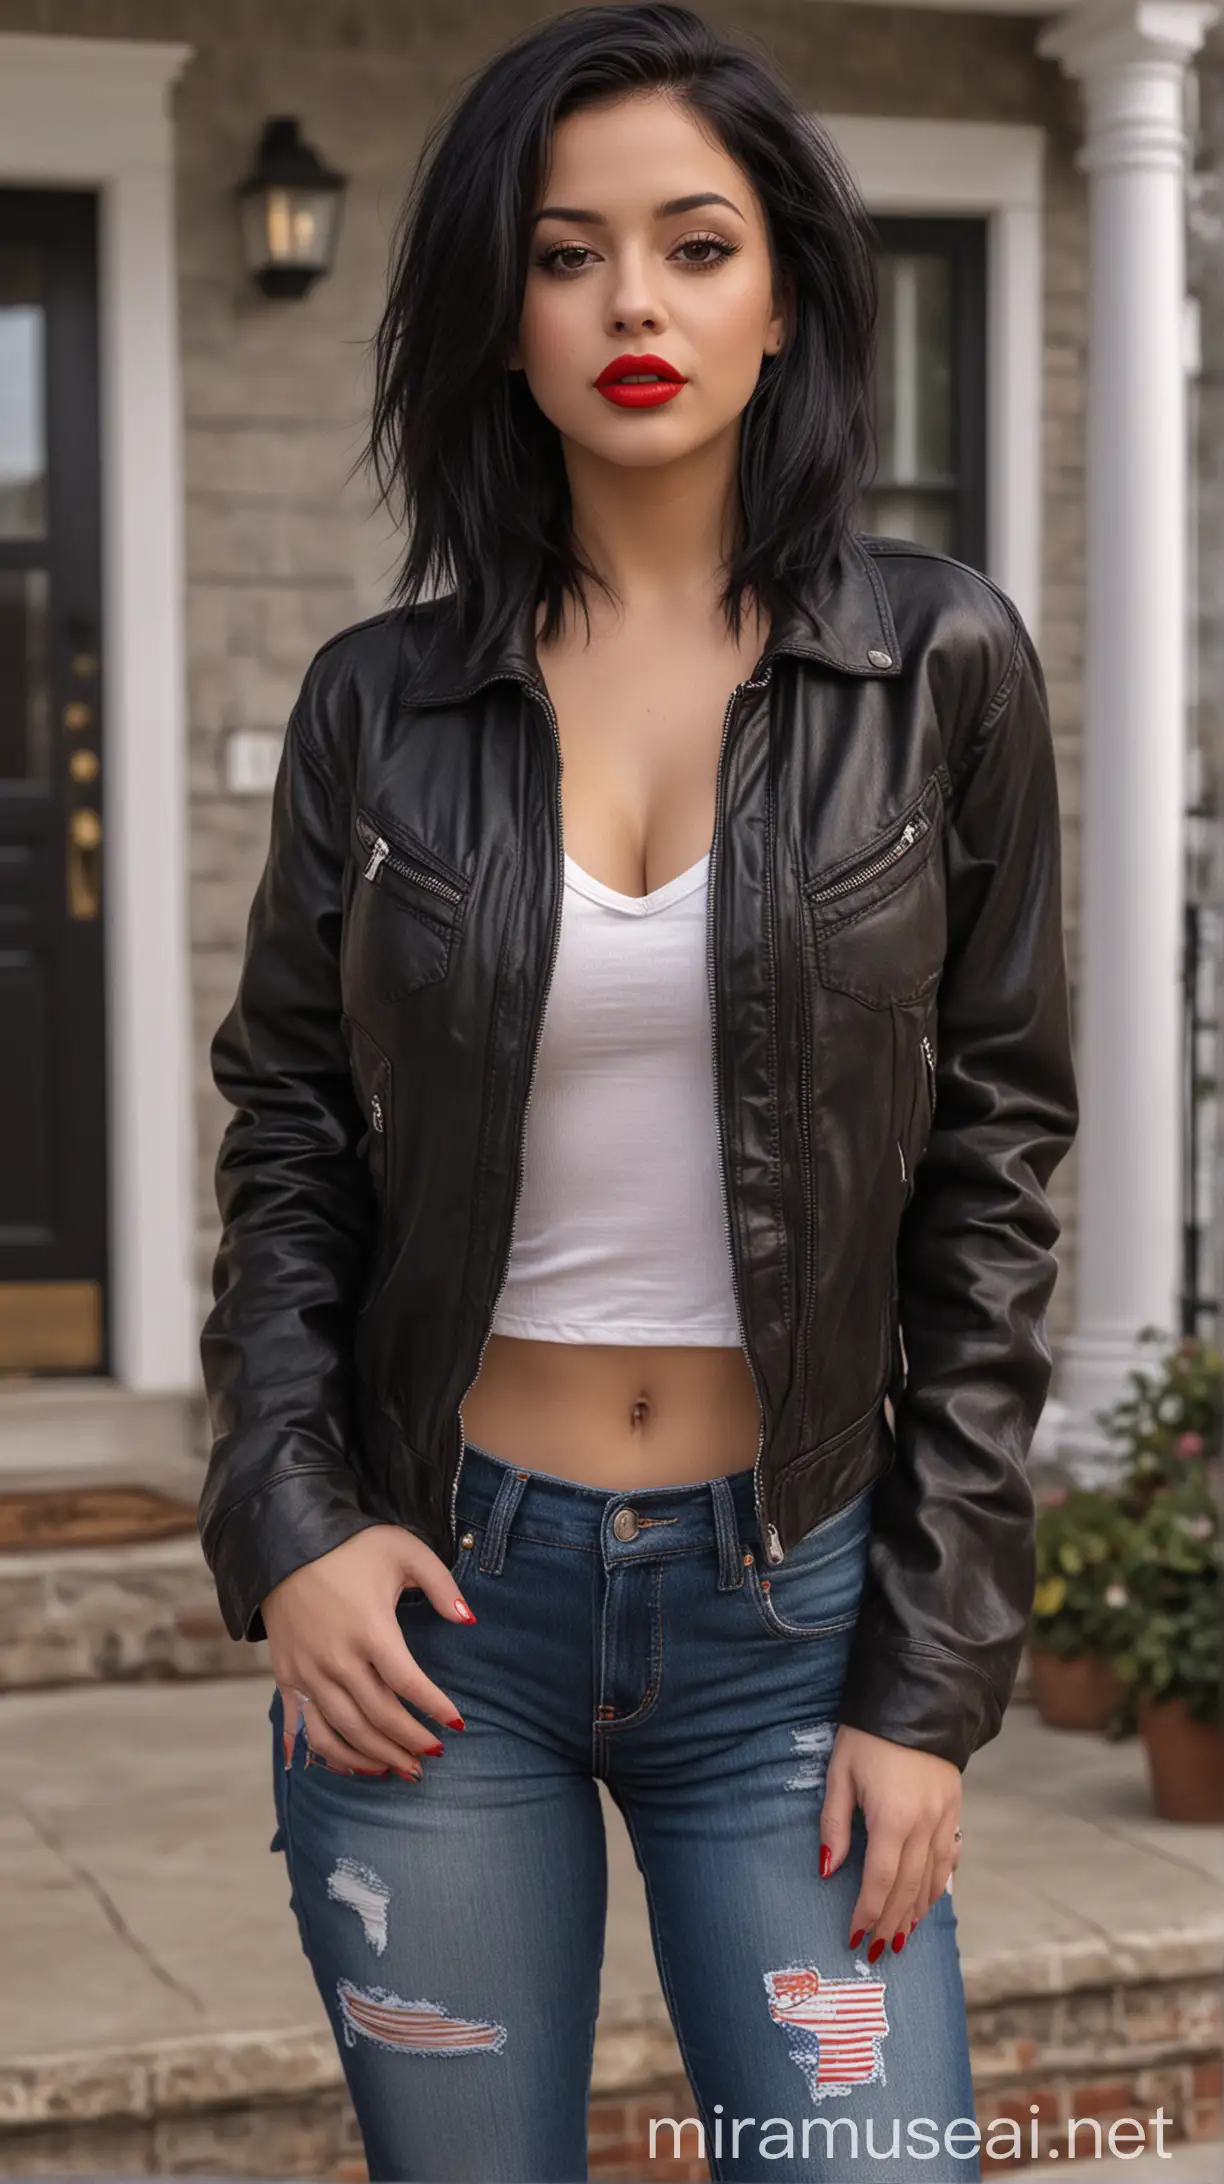 4k Ai art beautiful USA girl black hair red lipstick nose ring ear tops black jeans and brown zipper jacket big round tits in usa full front elevation of home